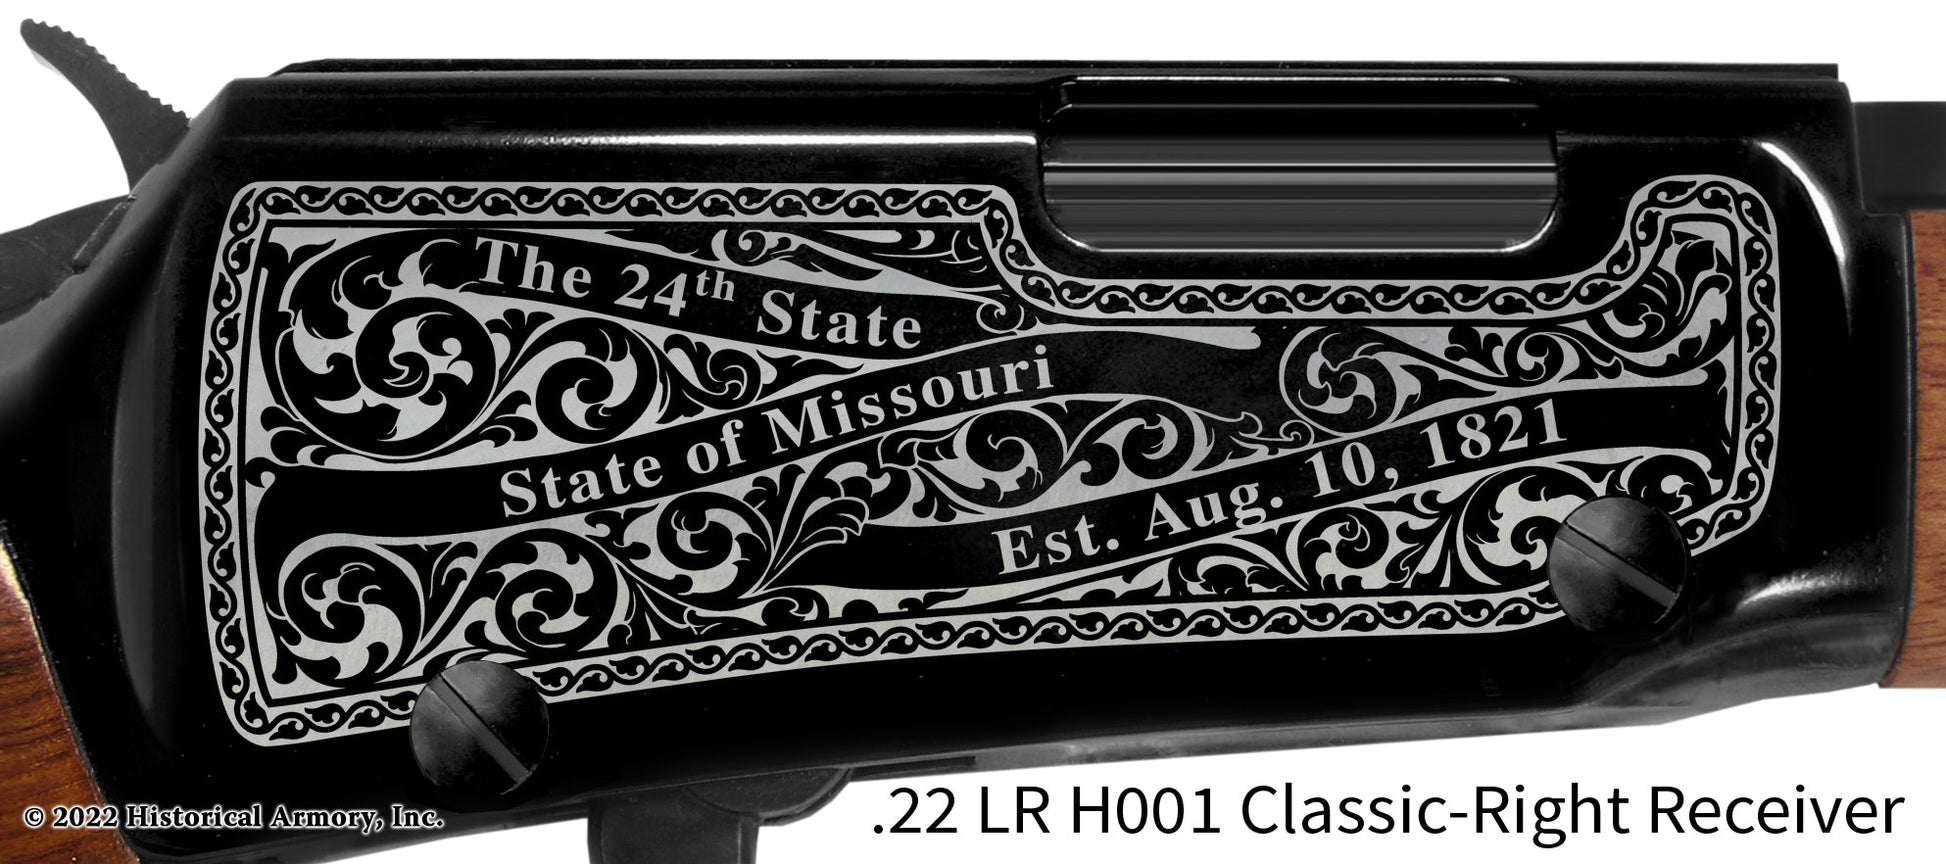 Marion County Missouri Engraved Henry H001 Rifle